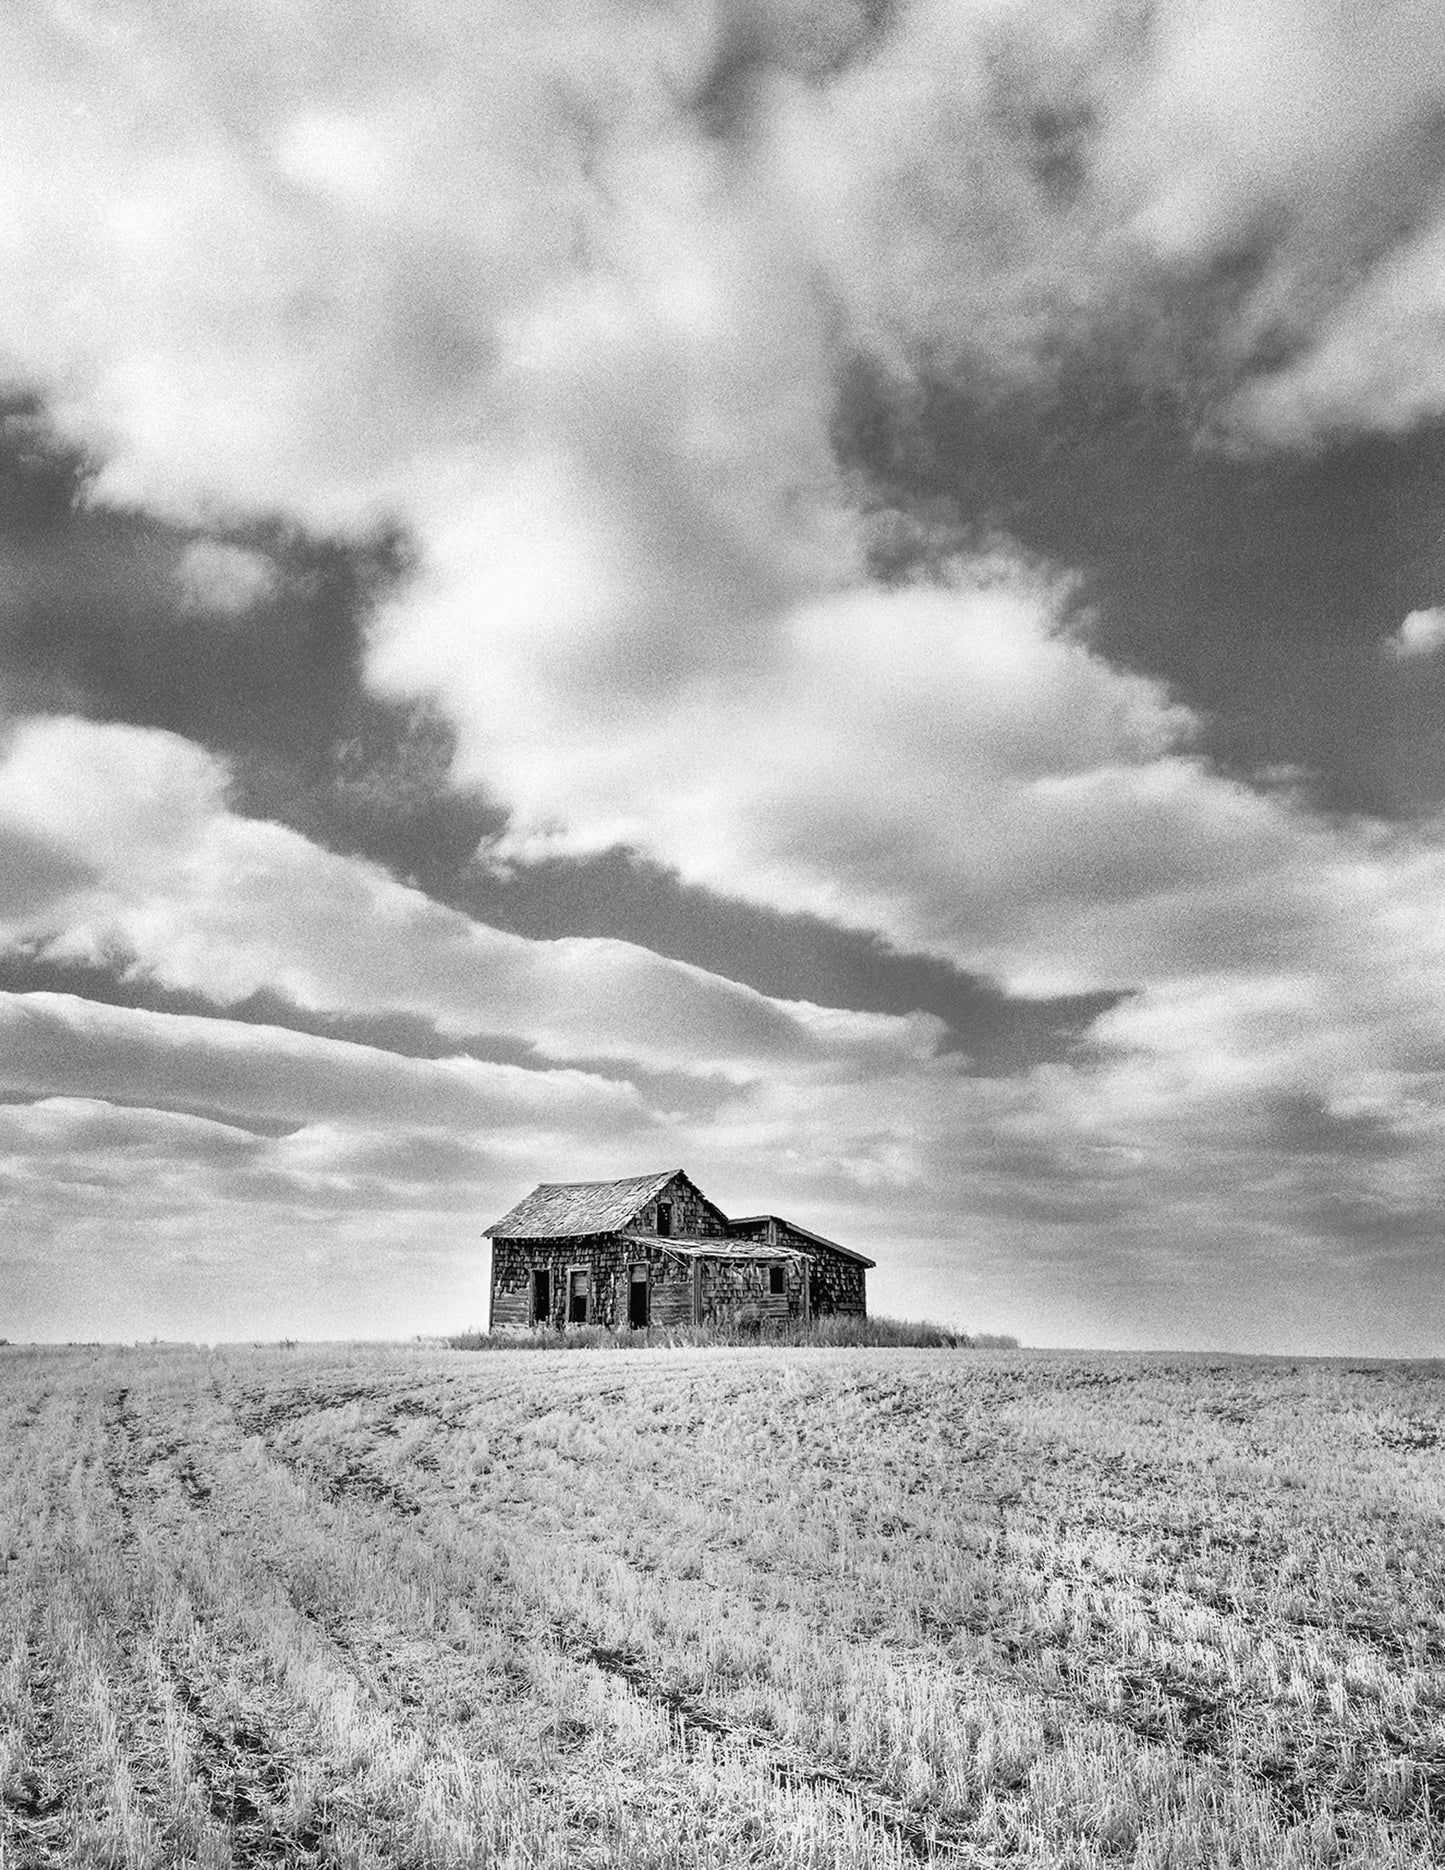 Fields, Furrows and Clouds, Mossleigh, Alberta, 2001